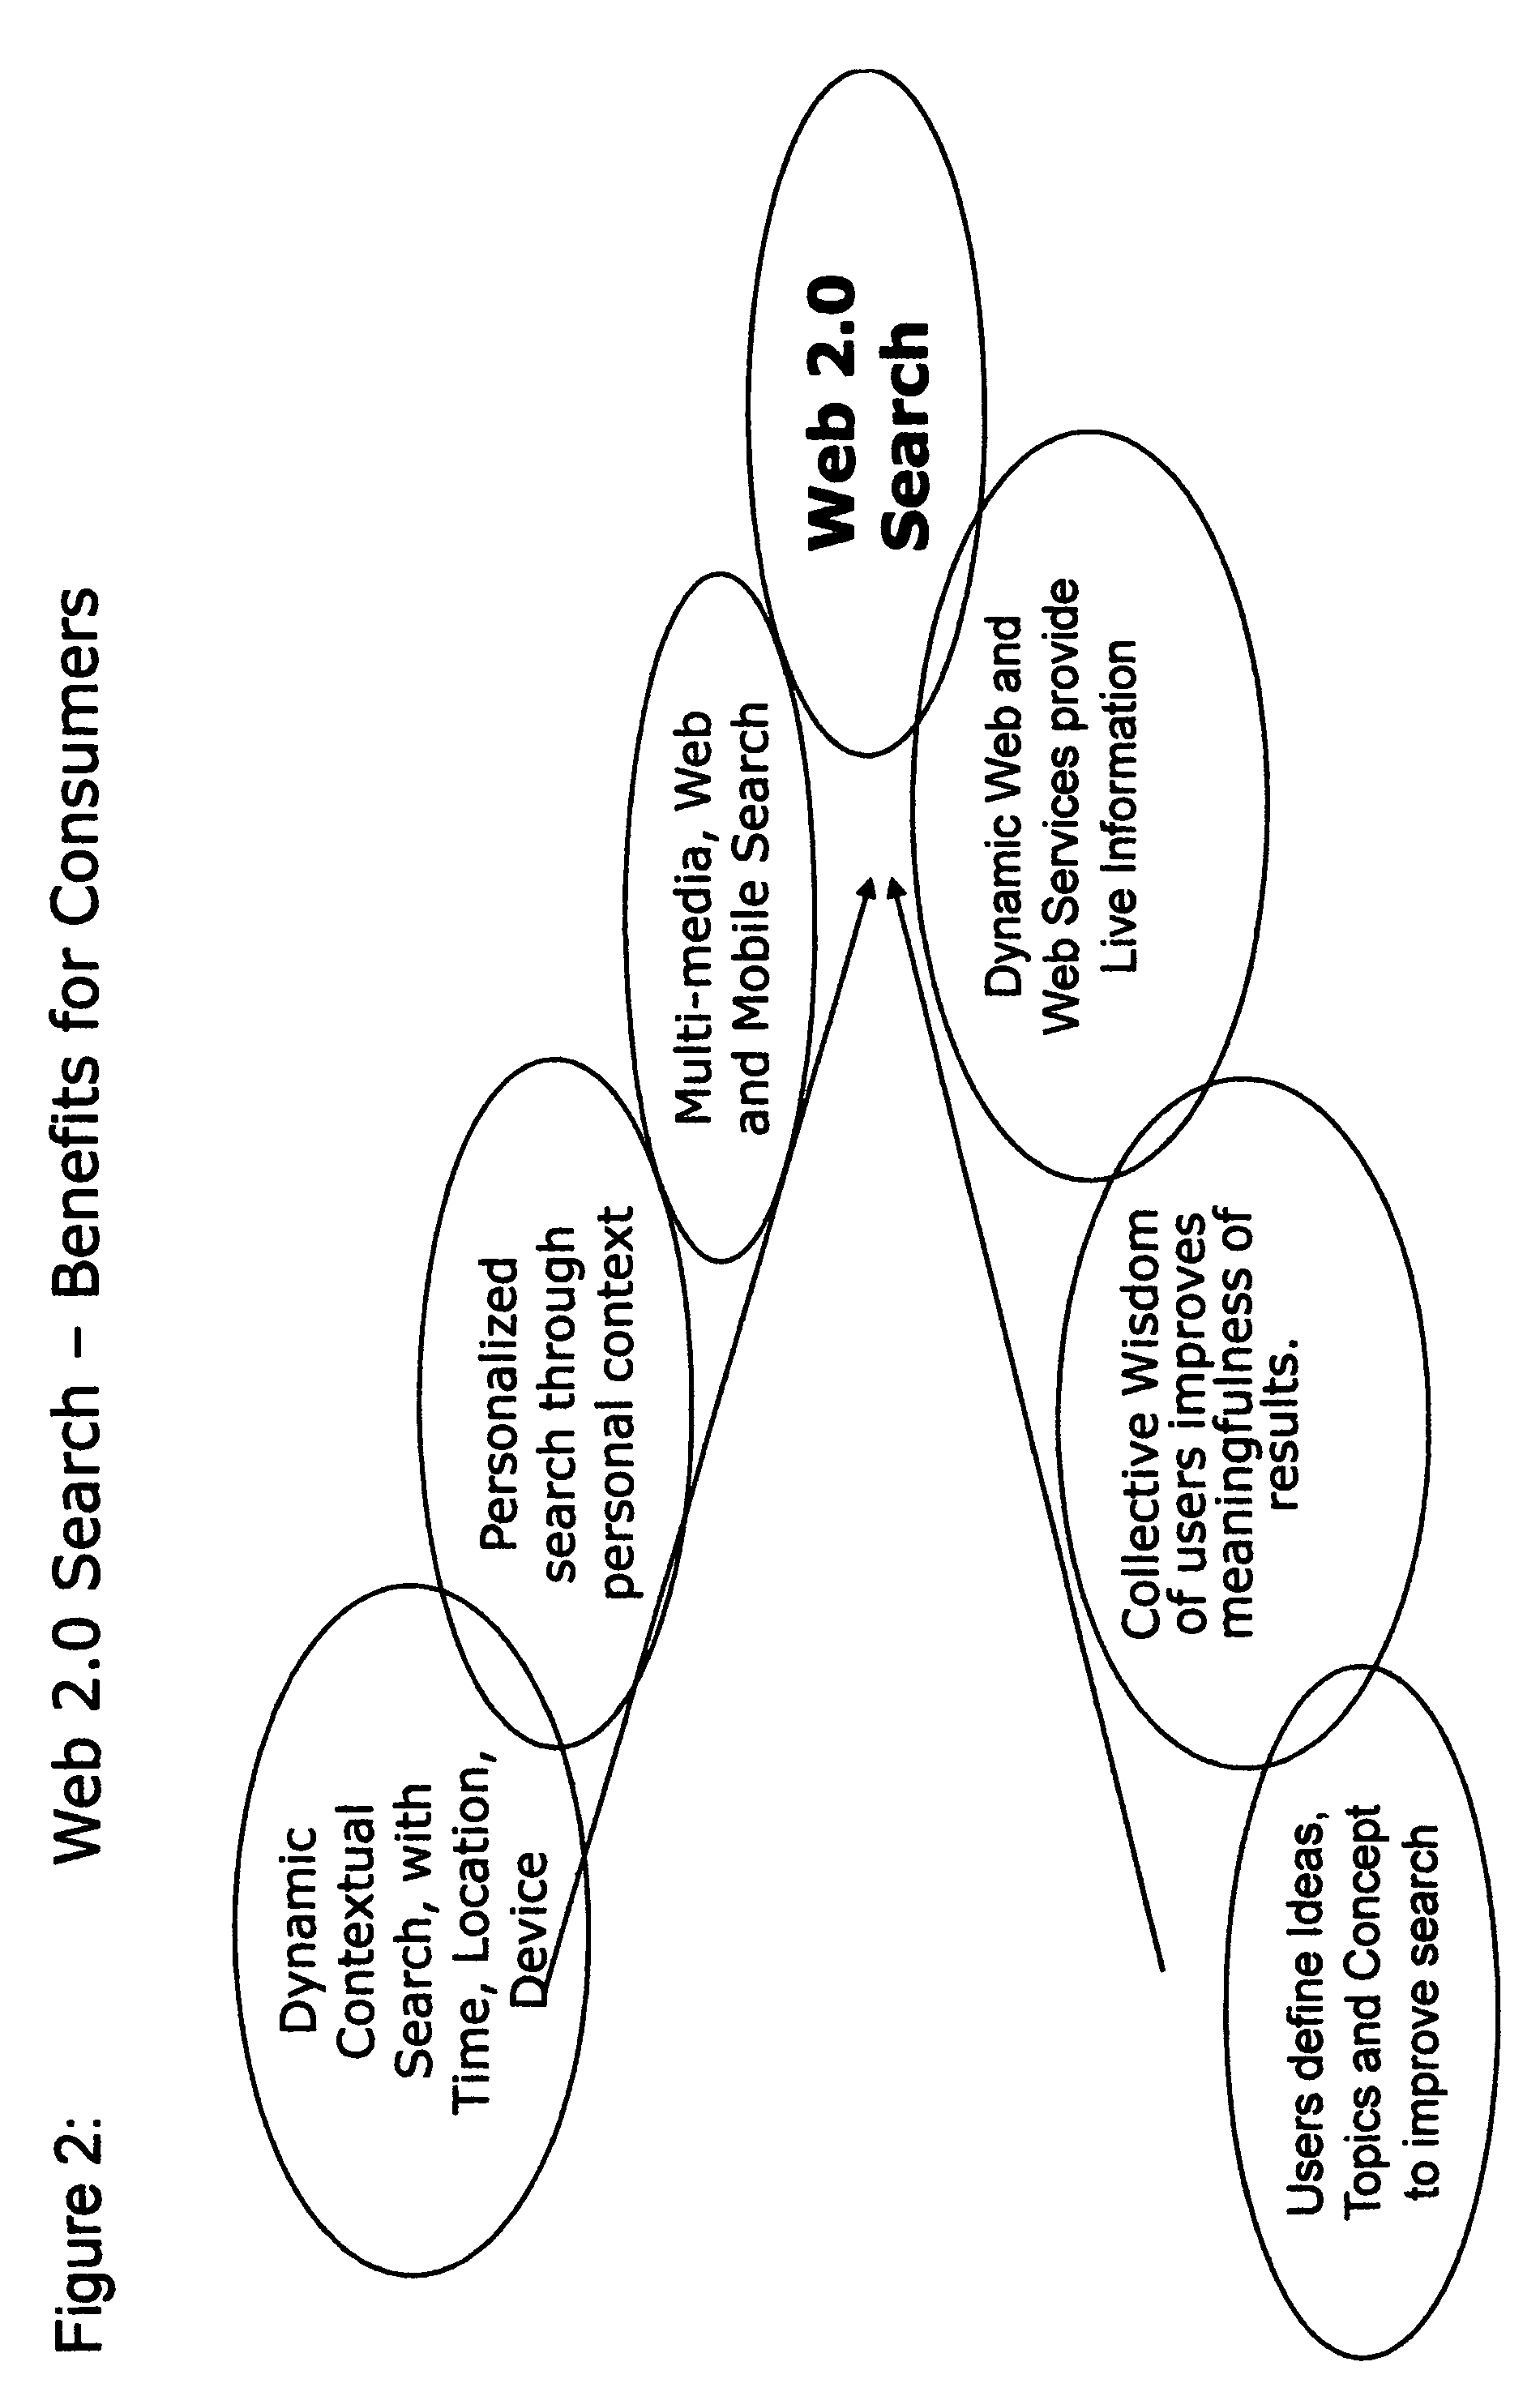 "Web 2.0 information search and presentation" with "consumer == author" and "dynamic Information relevance" models delivered to "mobile and web consumers".